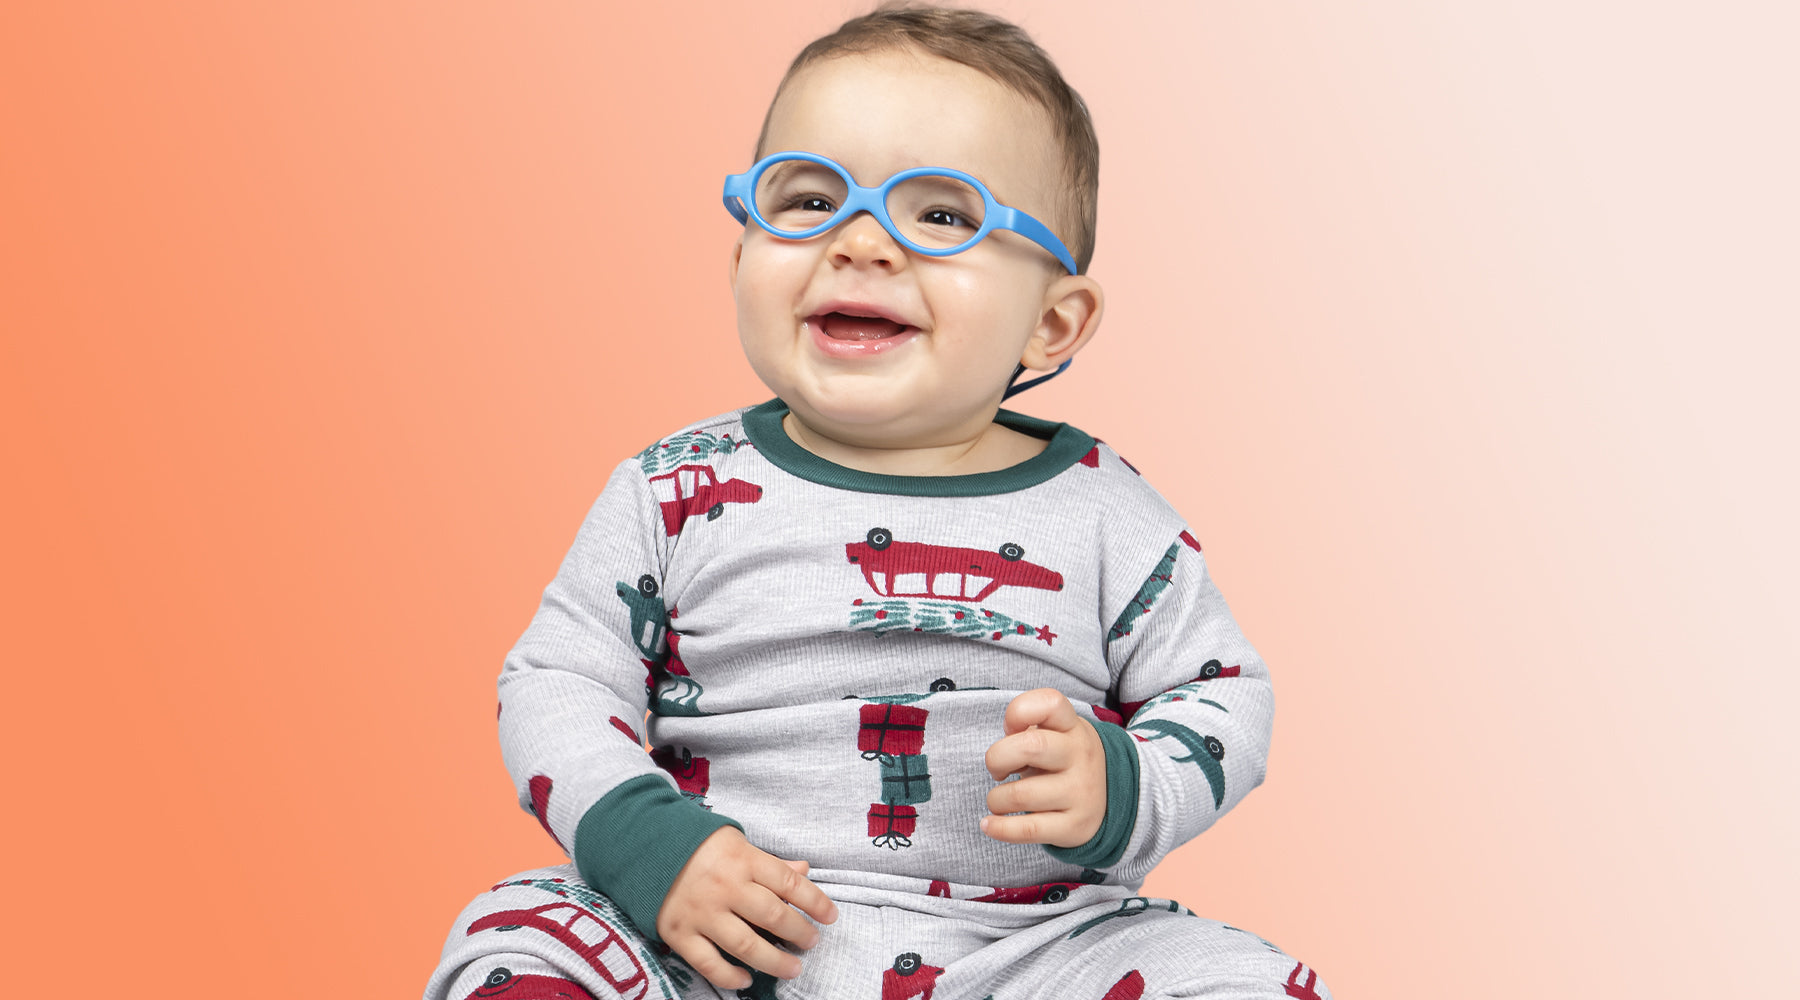 Why Flex Frames are the Best Choice for Children's Eyewear: Durability, Comfort, Safe Materials, and More